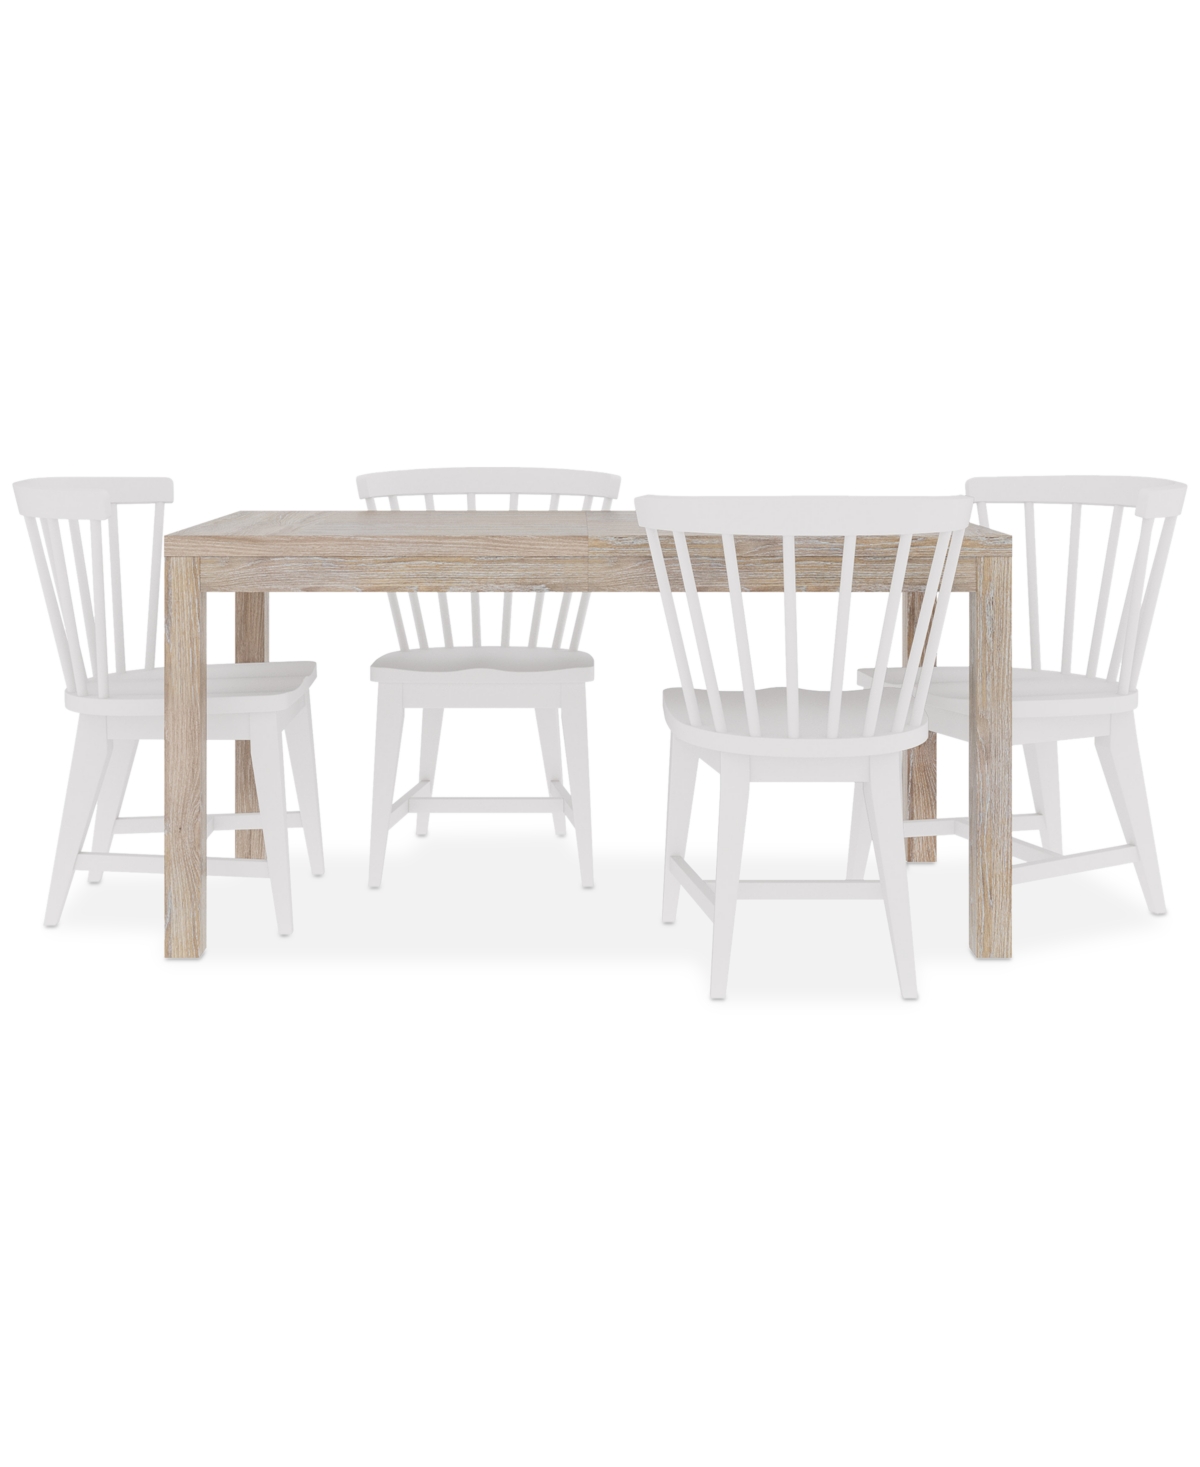 Macy's Catriona 5pc Dining Set (rectangular Dining Table + 4 Wood Side Chairs) In White